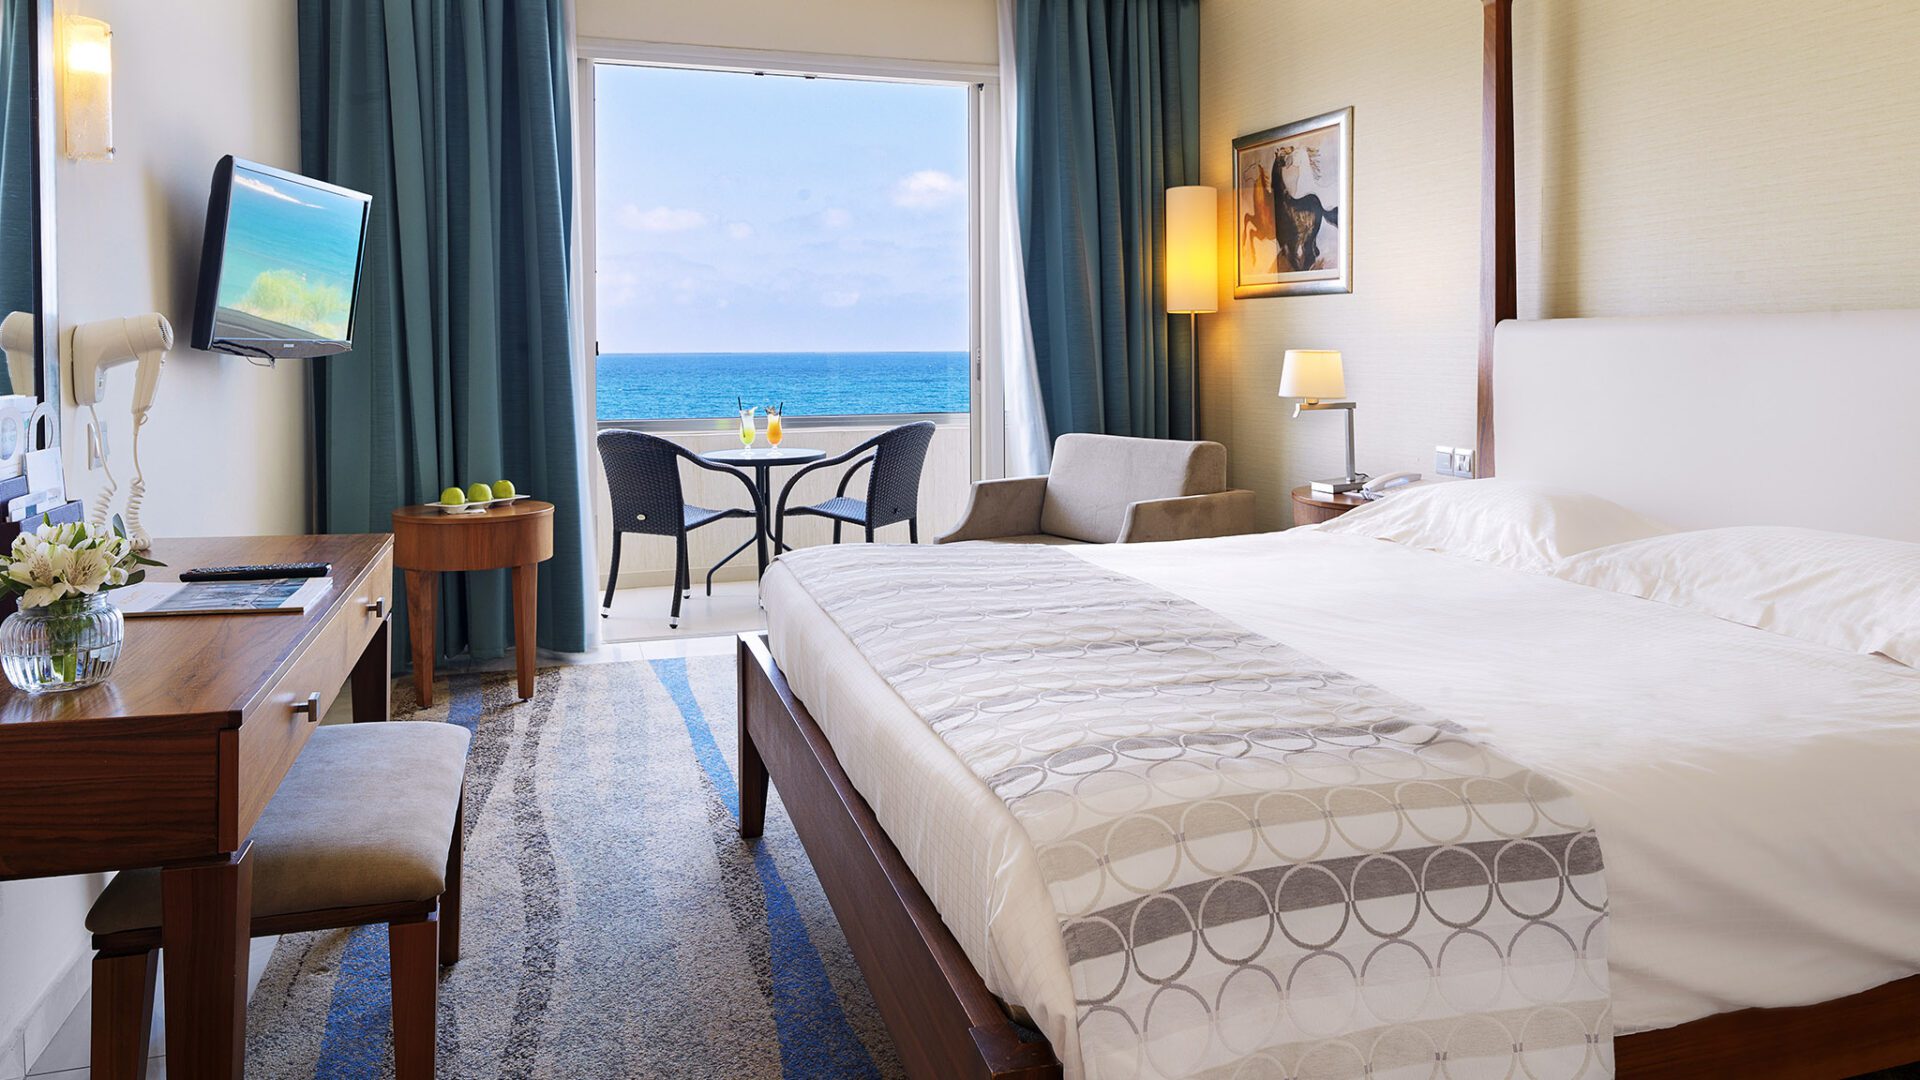 Sea View Rooms at Alexander the Great Beach Hotel in Paphos Cyprus